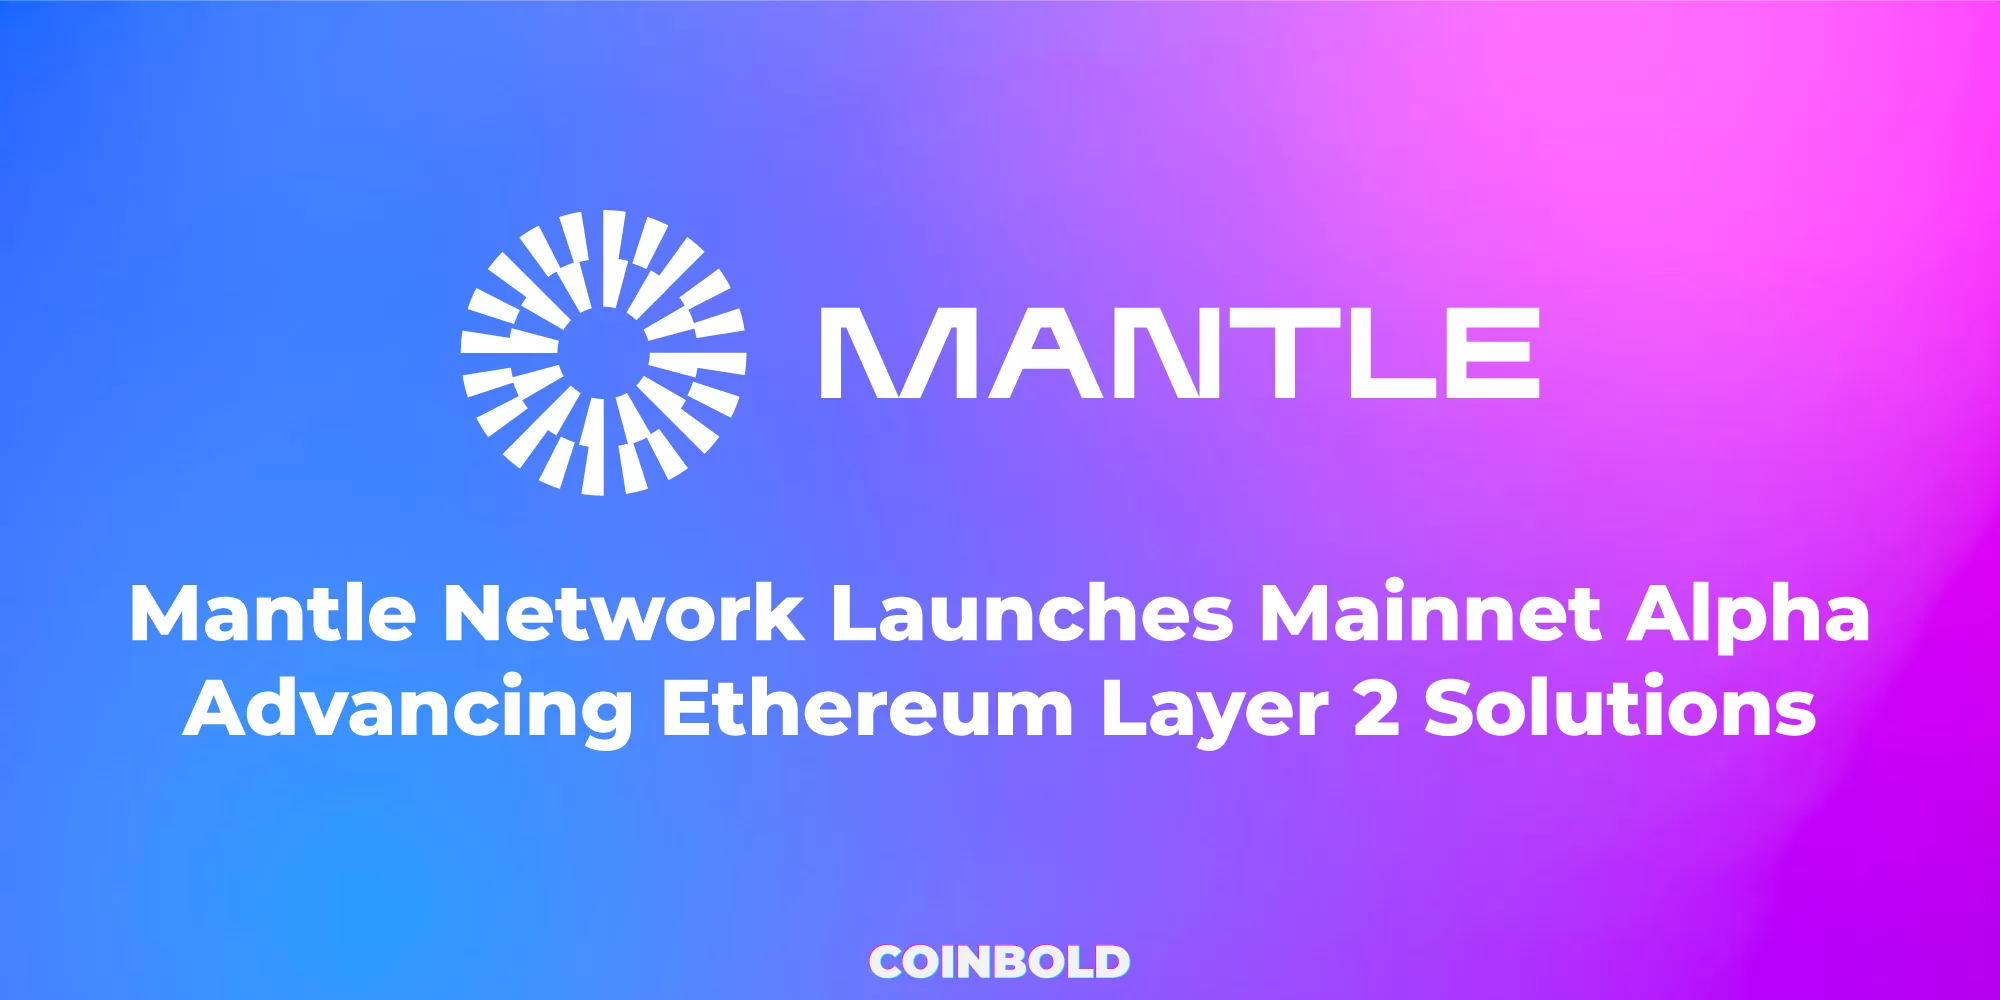 Mantle Network Launches Mainnet Alpha Advancing Ethereum Layer 2 Solutions jpg.webp